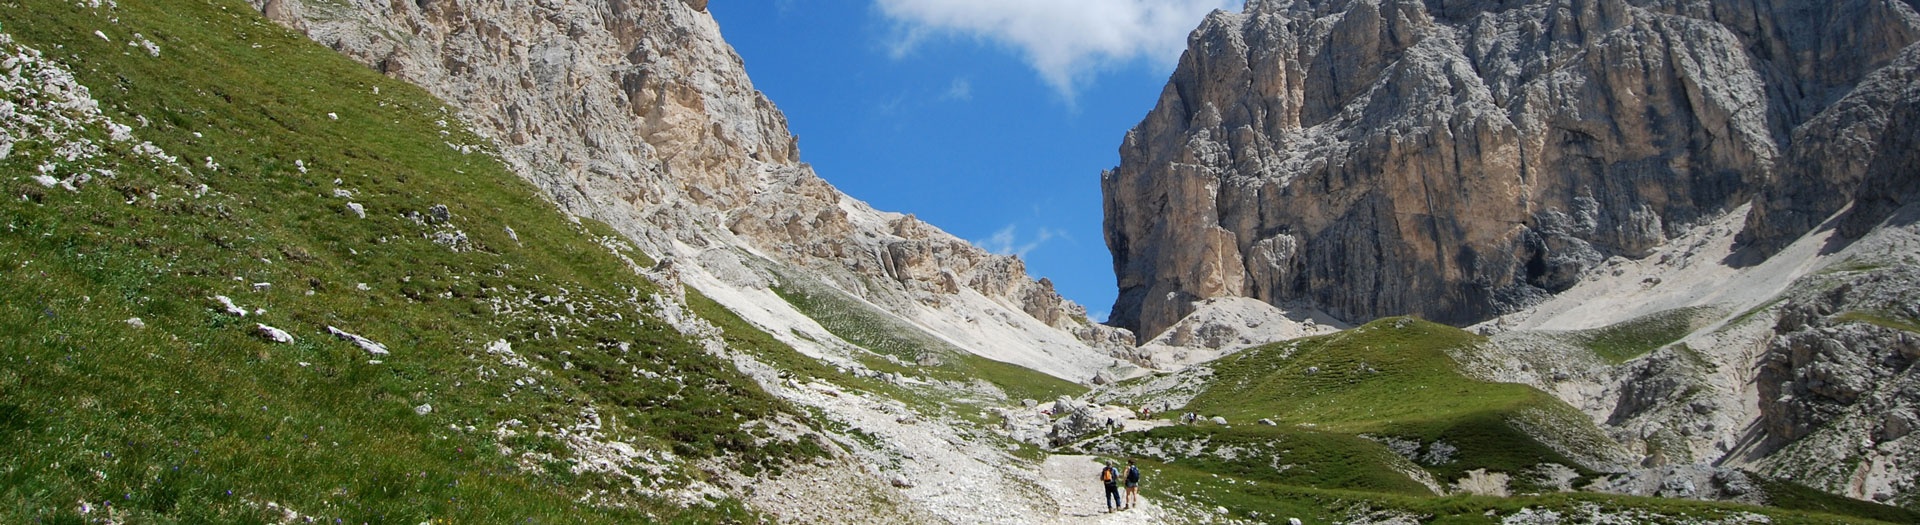 The Emblematic Trails and Highlights of the Dolomites